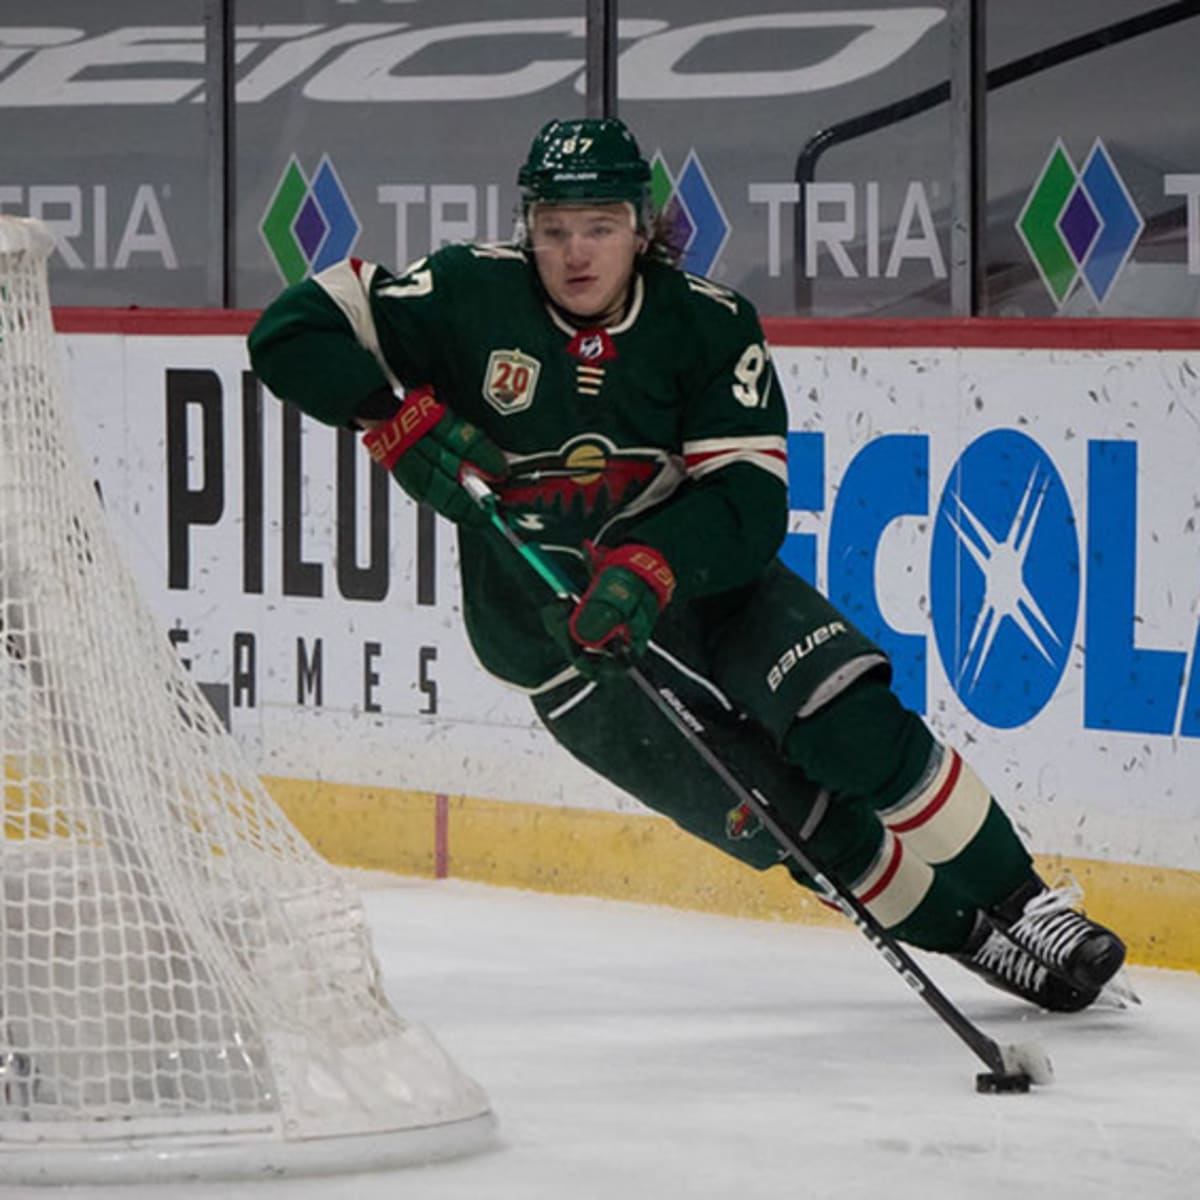 Wild, Kaprizov agree to 5-year deal - Bring Me The News